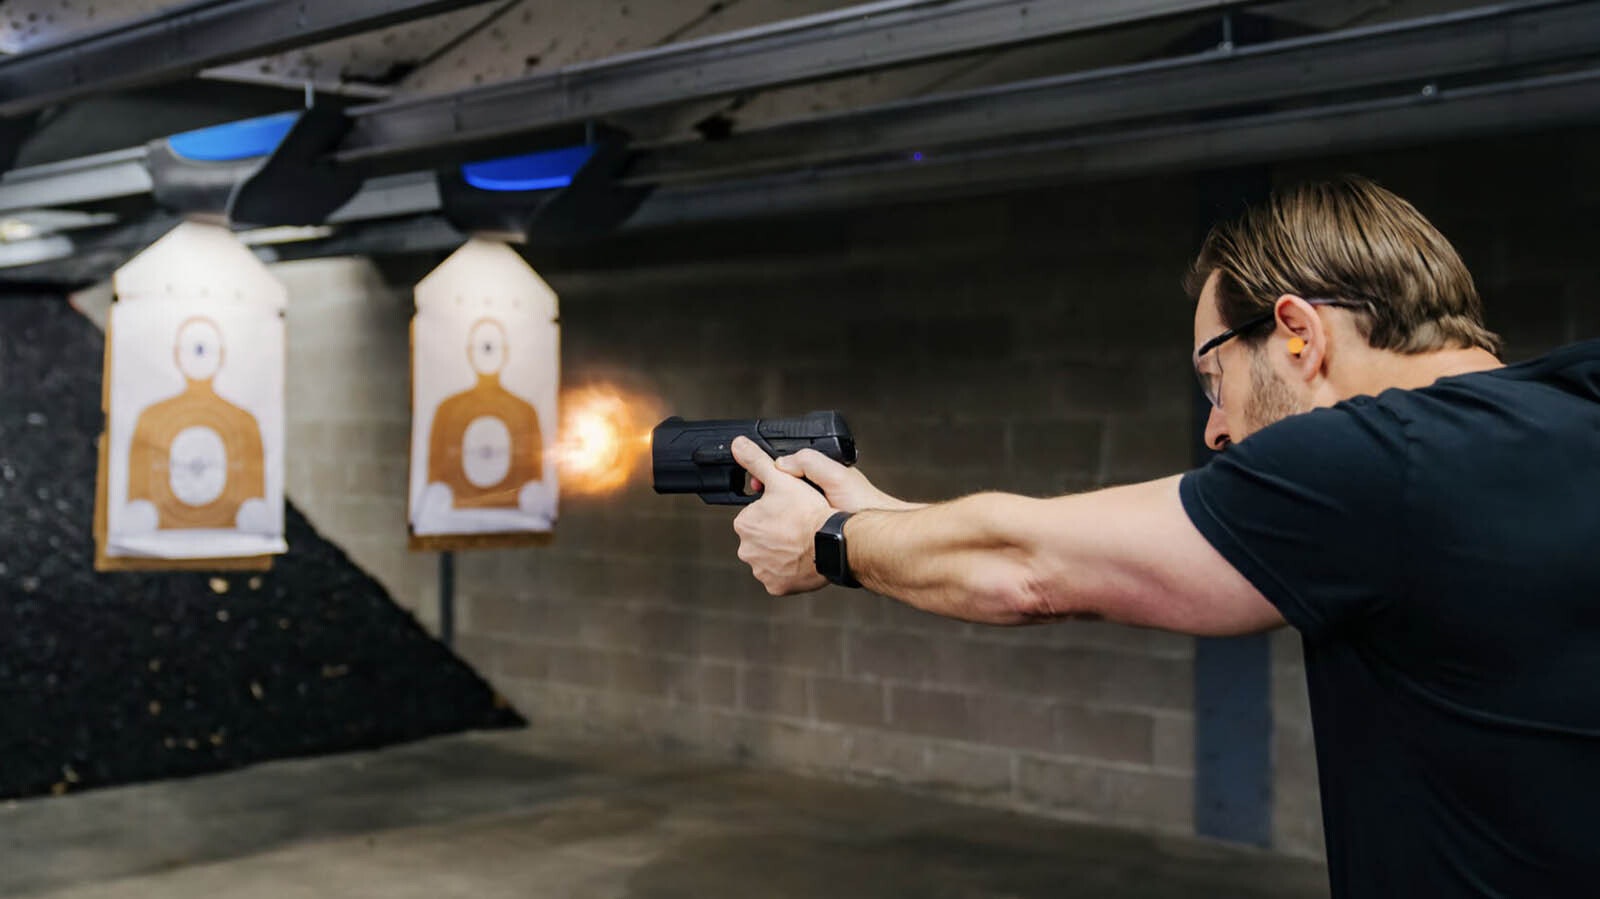 The "smart" firearms made by Colorado-based Biofire have fingerprint and facial recognition technology built in.